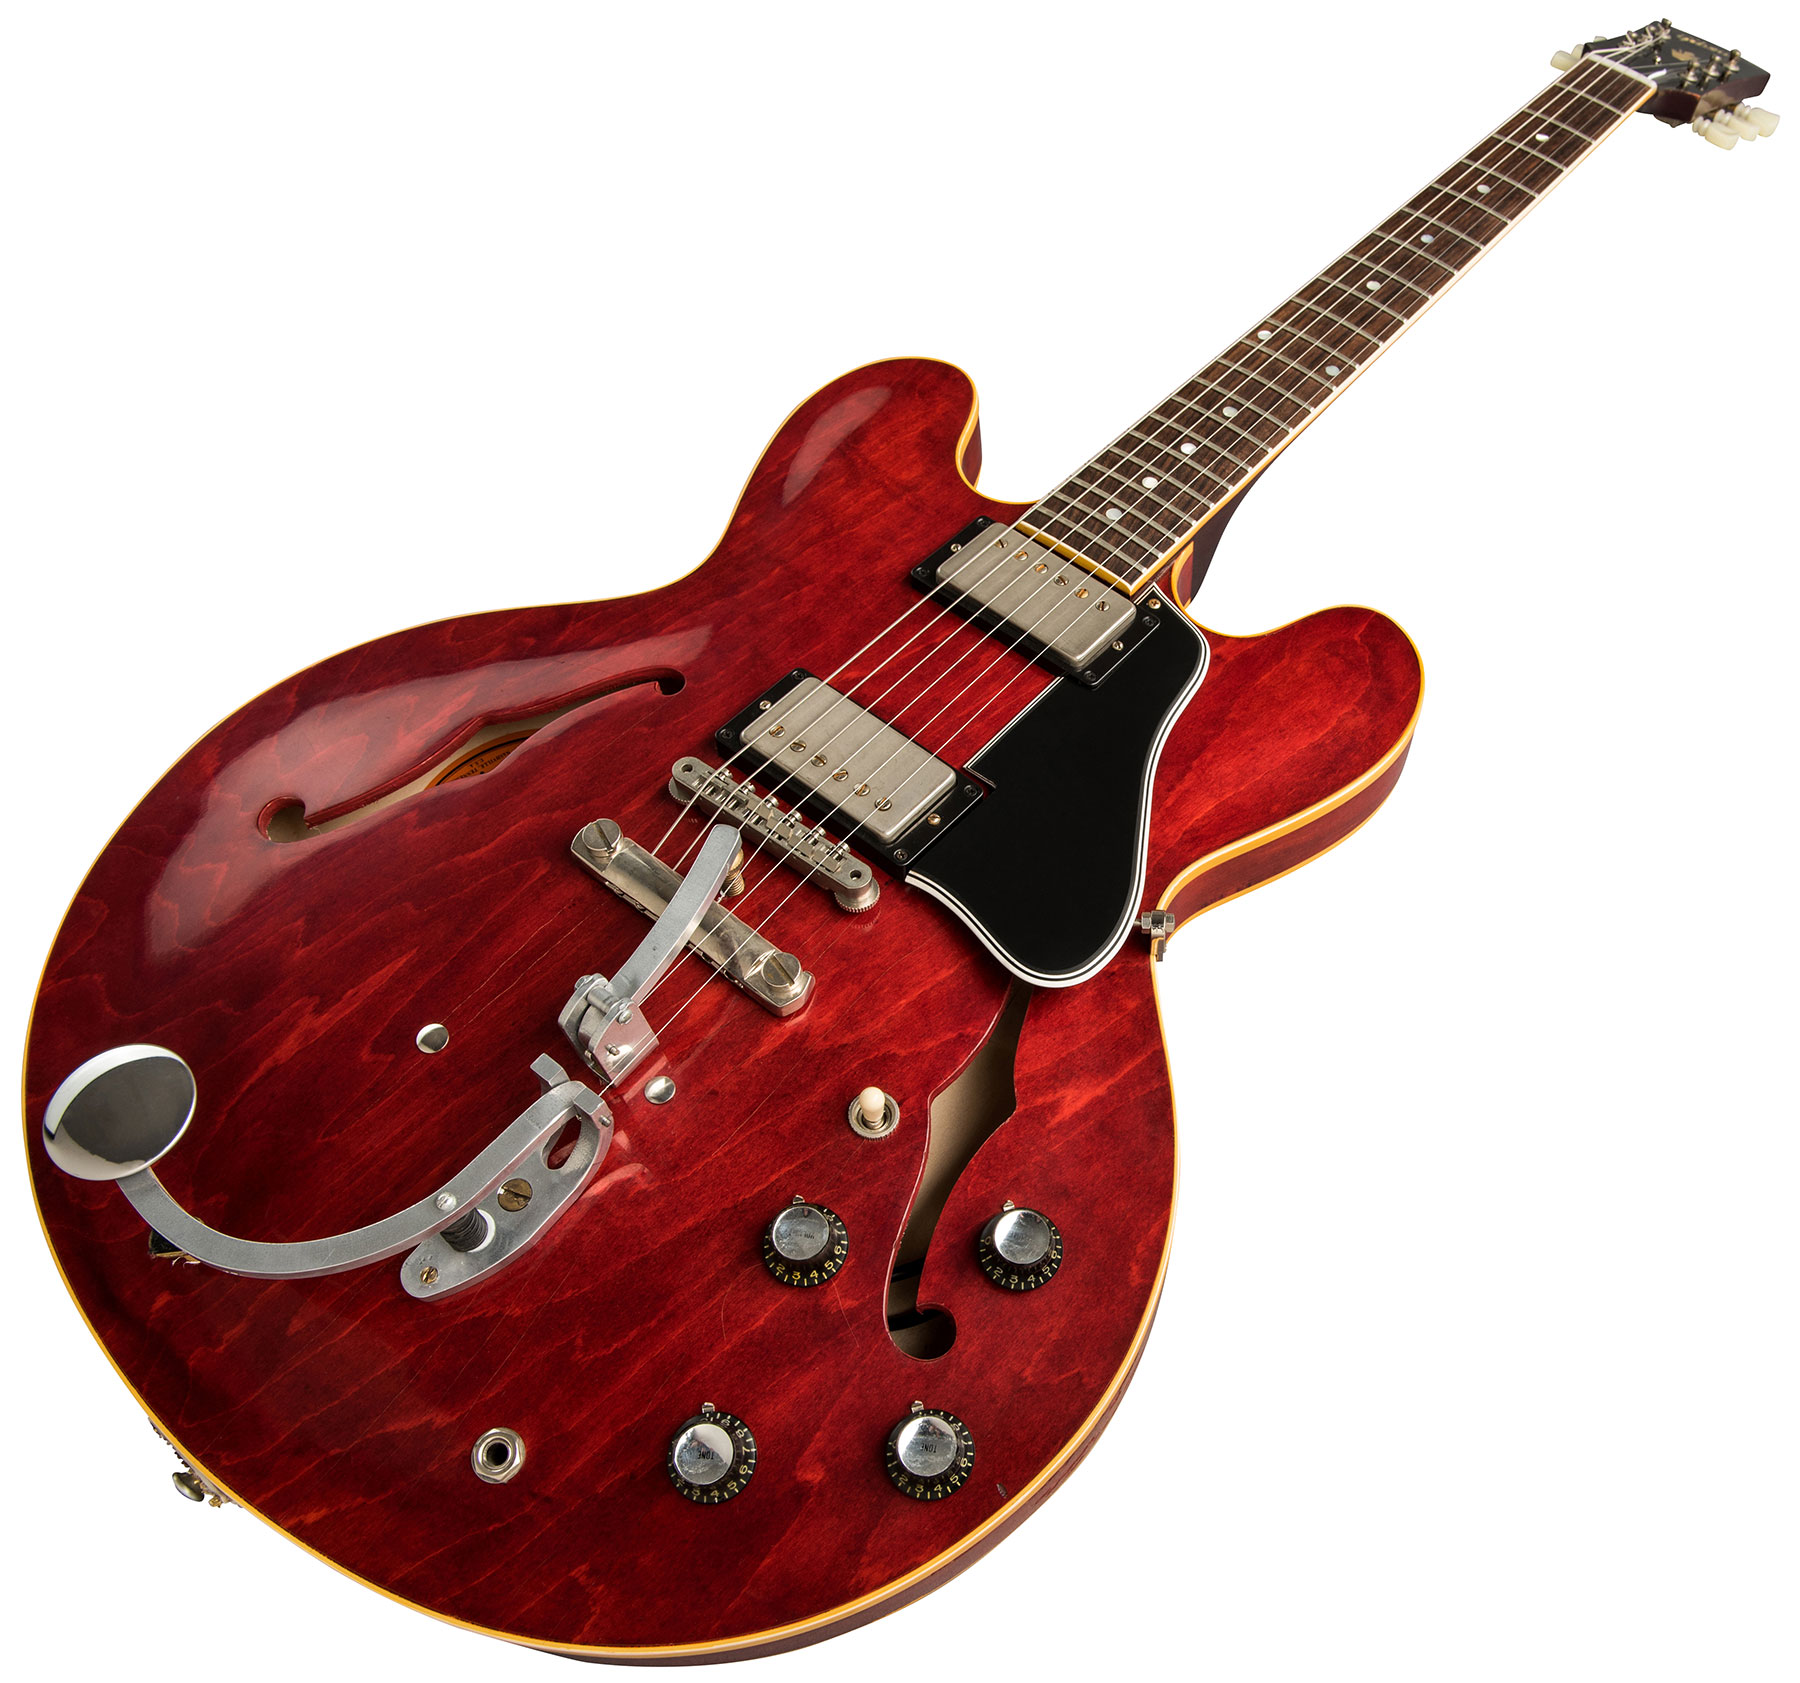 Gibson Custom Shop Jerry Kennedy Es-335 1961 Pretty Woman 2019 Ltd 2h Ht Rw - Aged Faded Cherry - Guitare Électrique Signature - Variation 2